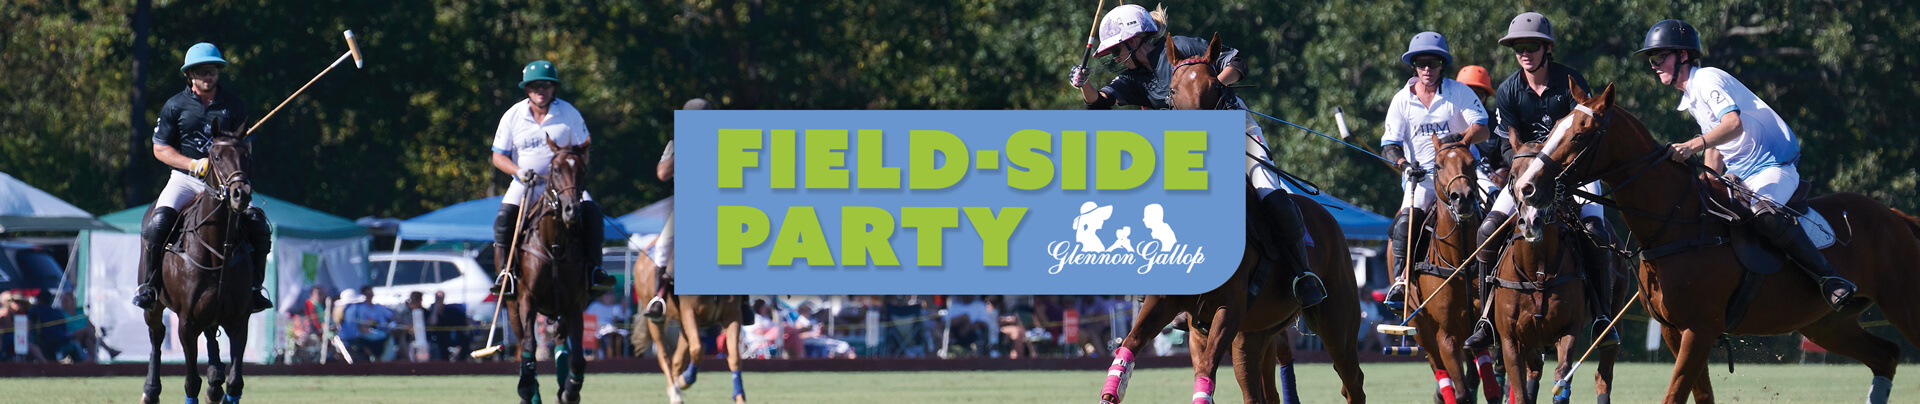 Field-Side Party at Glennon Gallop - Saturday, September 16